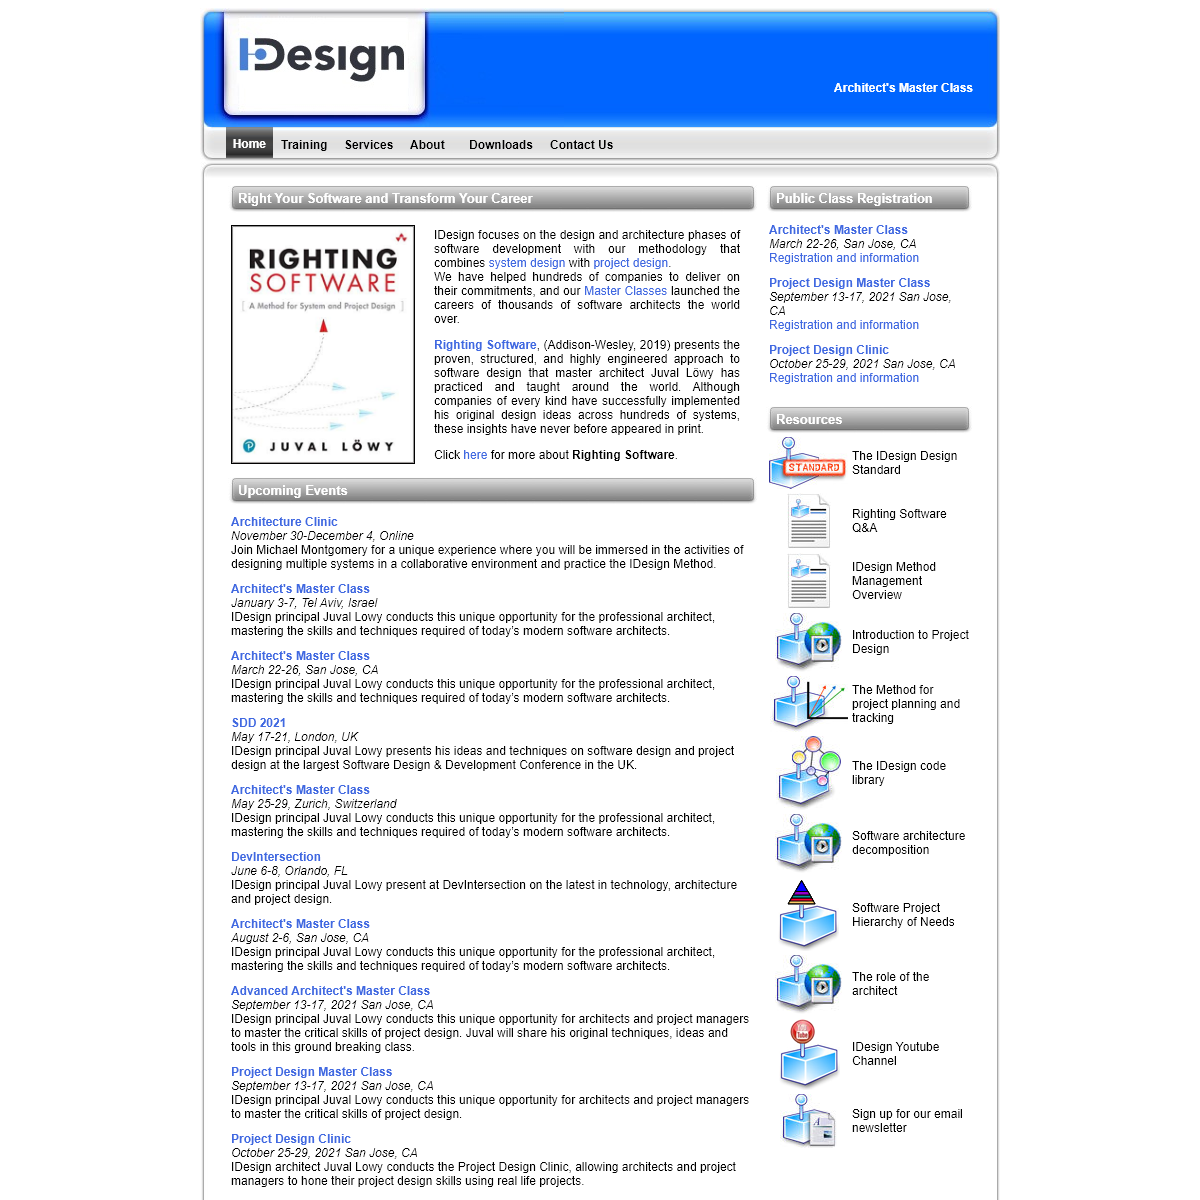 A complete backup of idesign.net